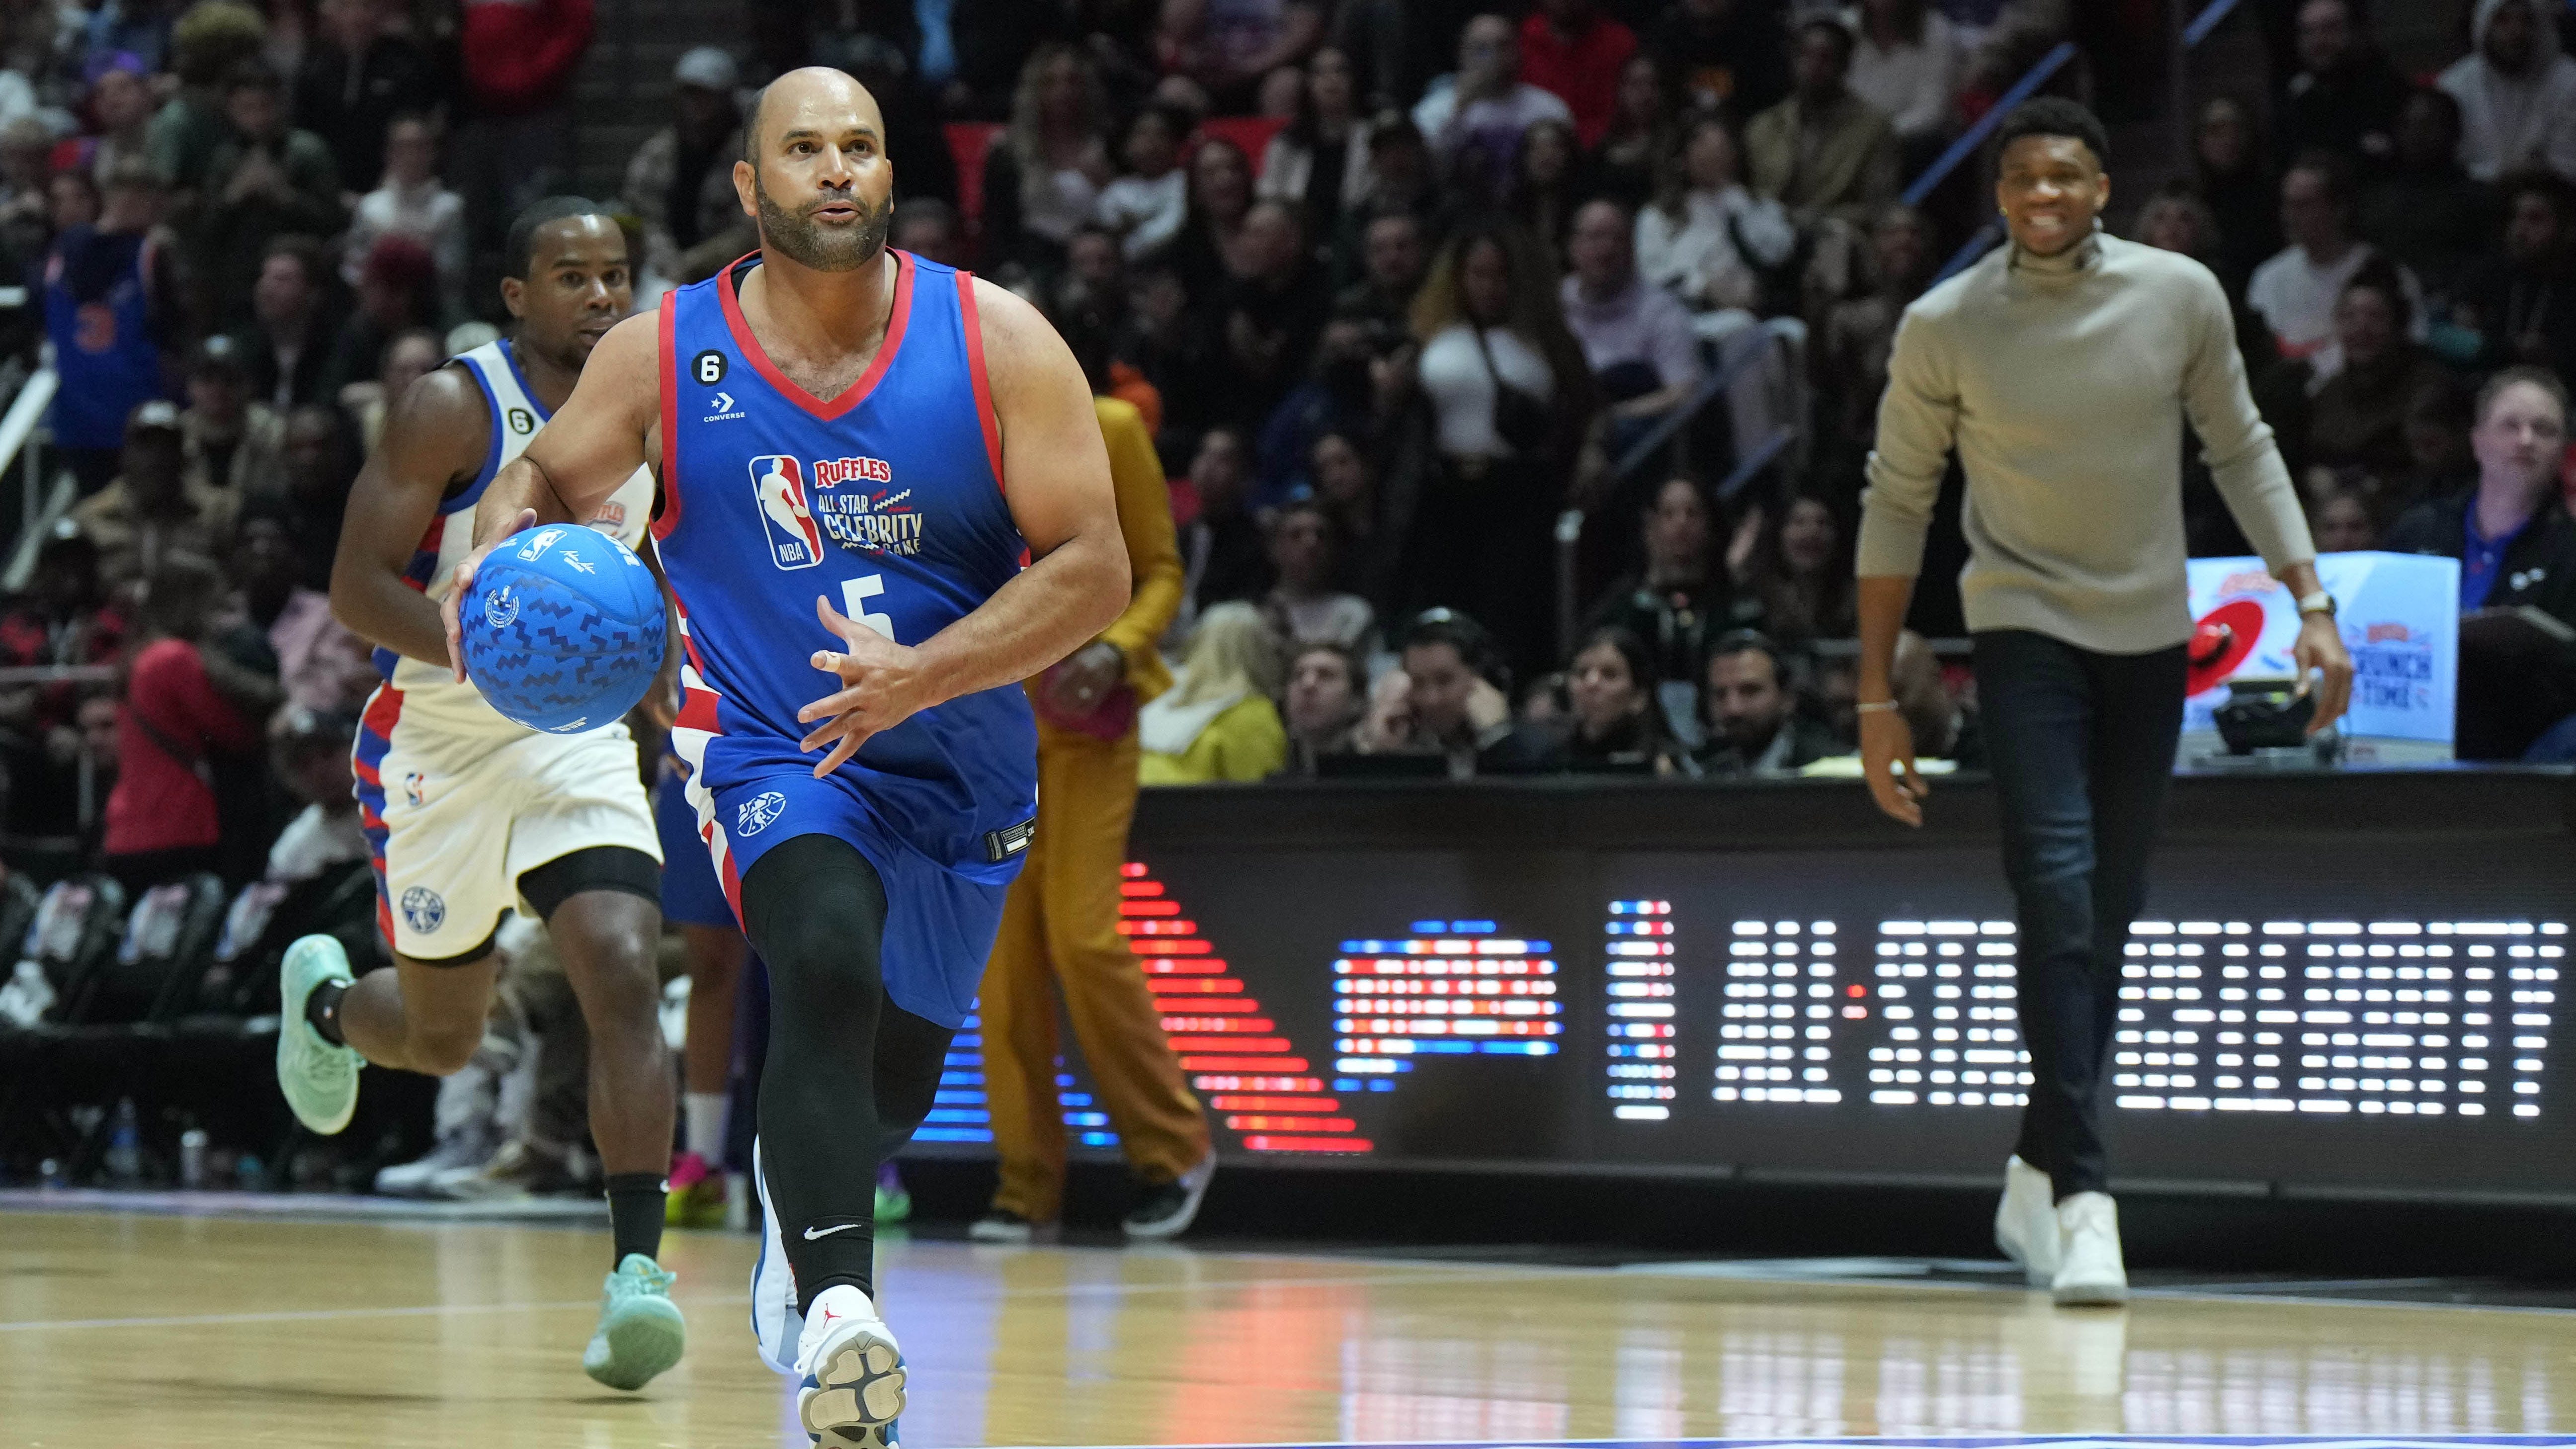 Albert Pujols participated in the 2023 NBA All Star celebrity game on Feb. 17.